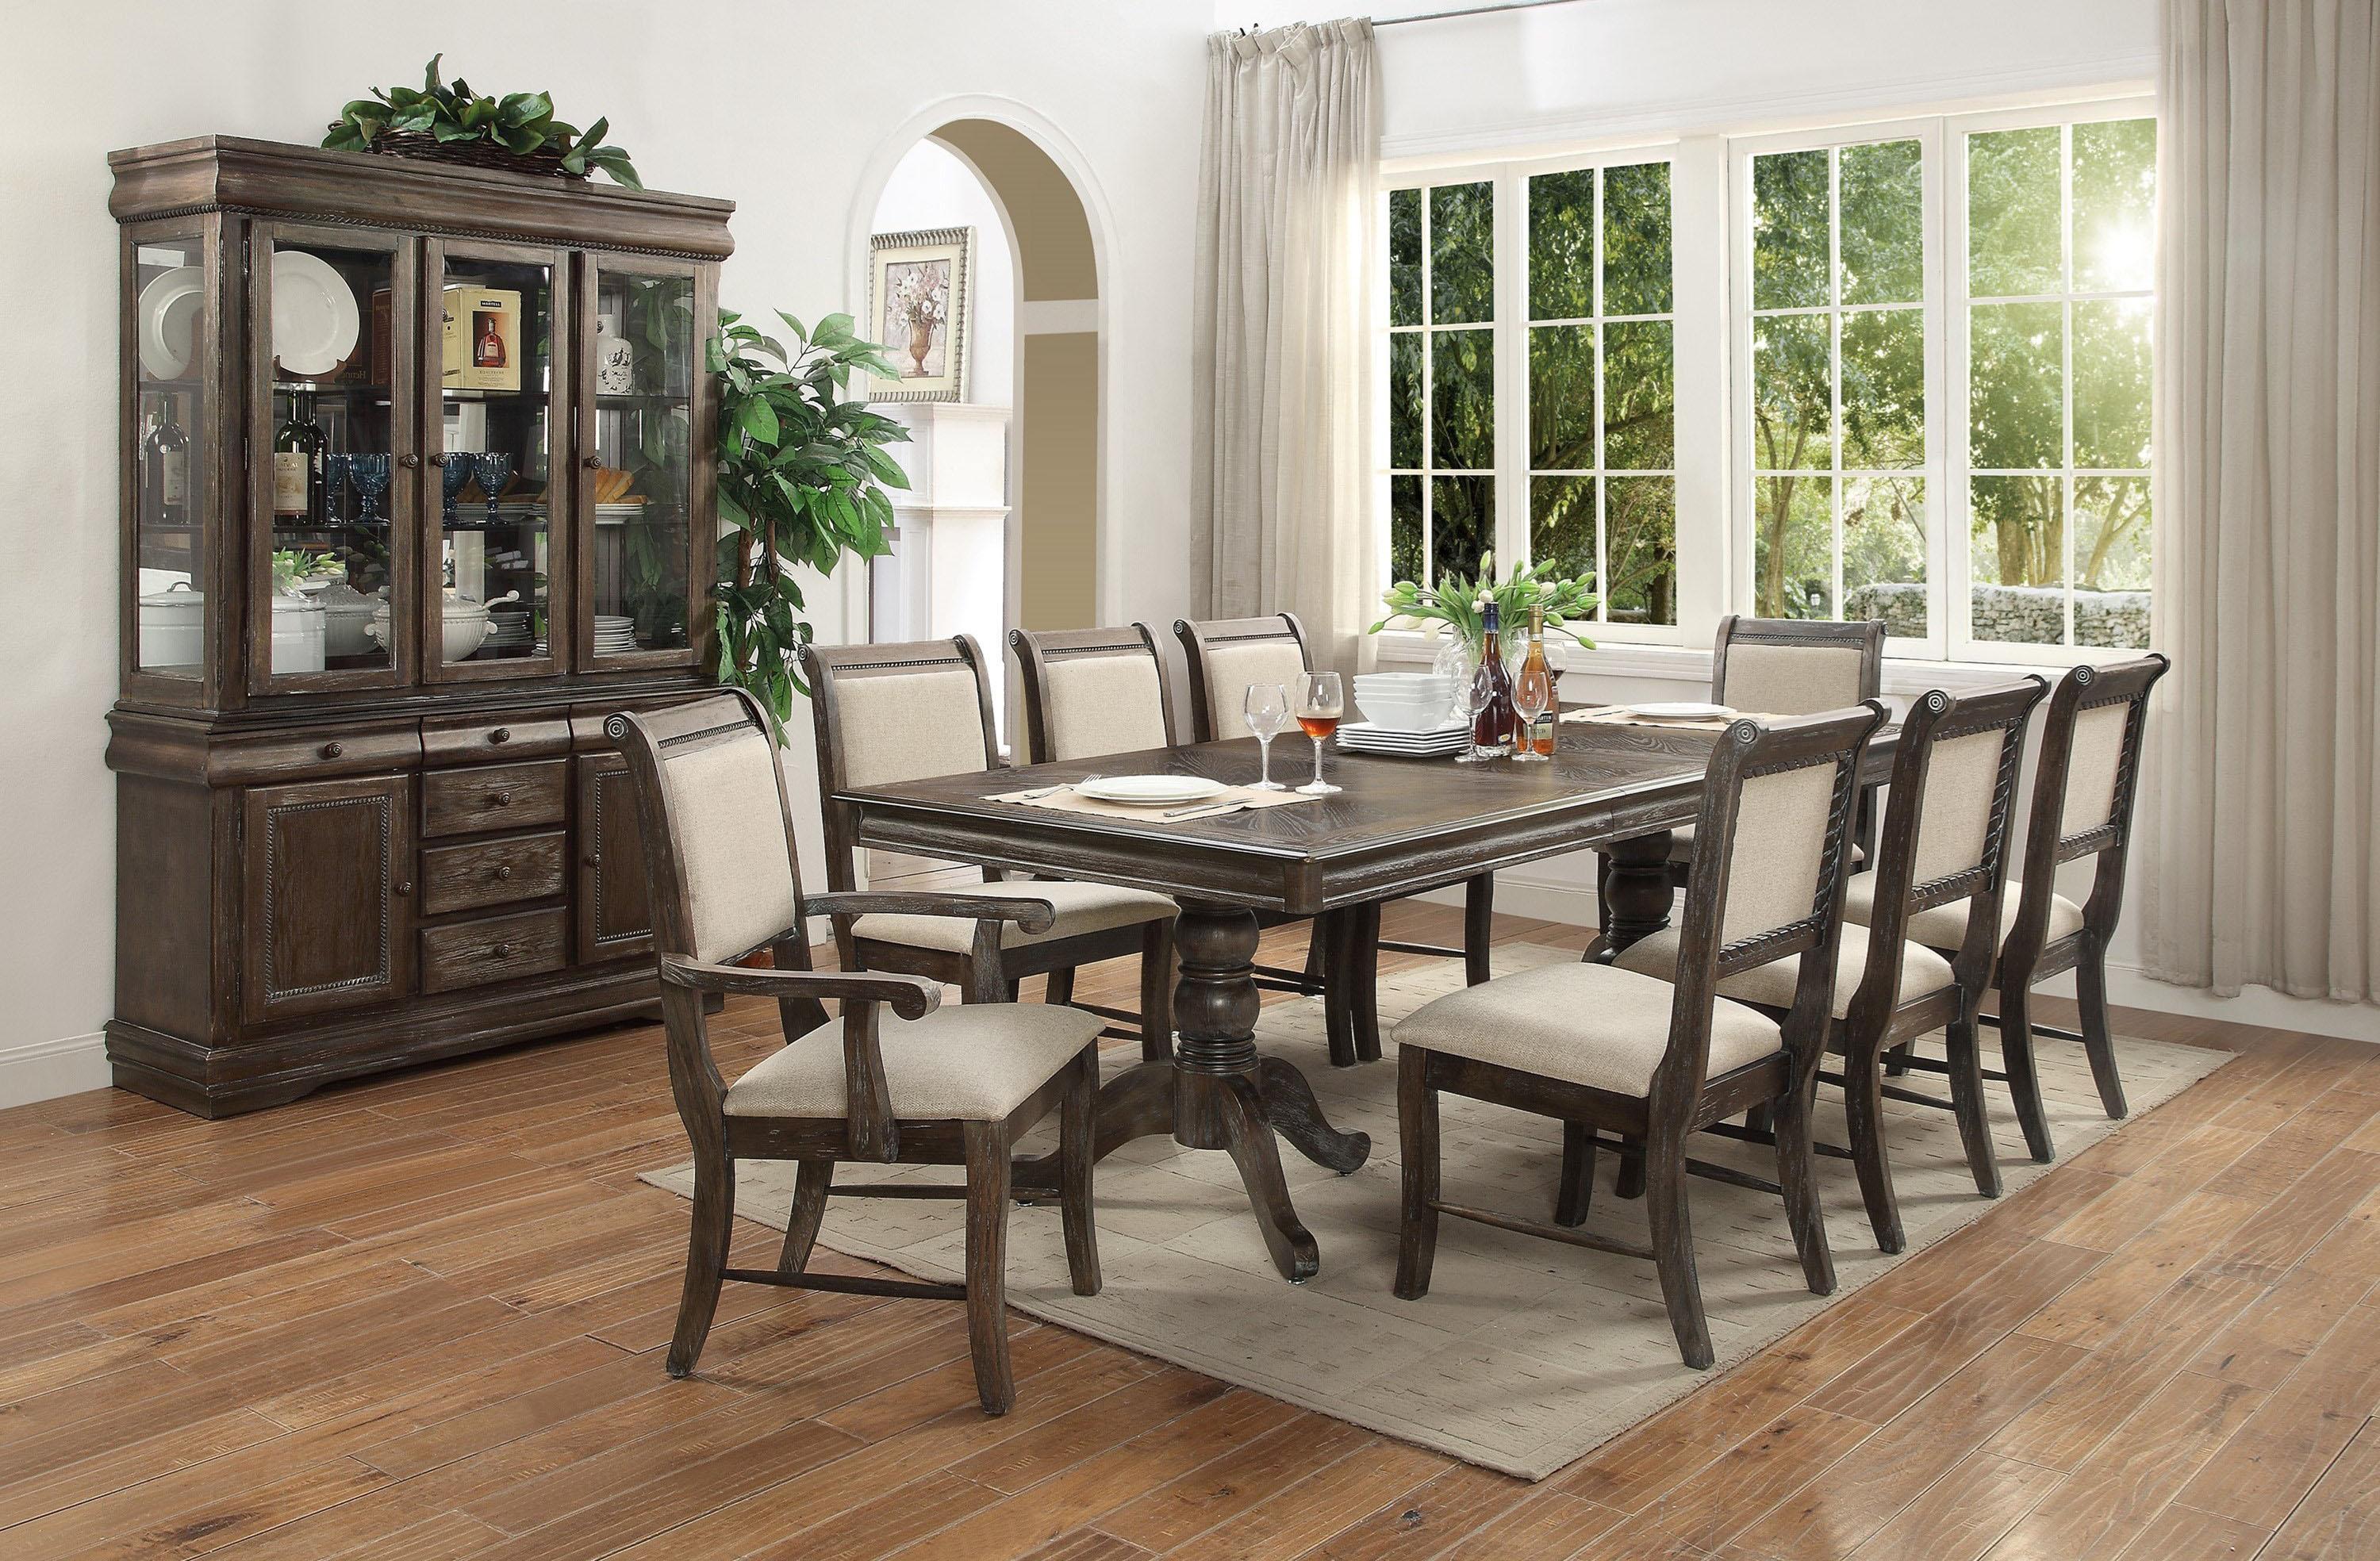 Traditional Dining Table Set Merlot 2147 2147-DT-Set-9 in Gray Fabric